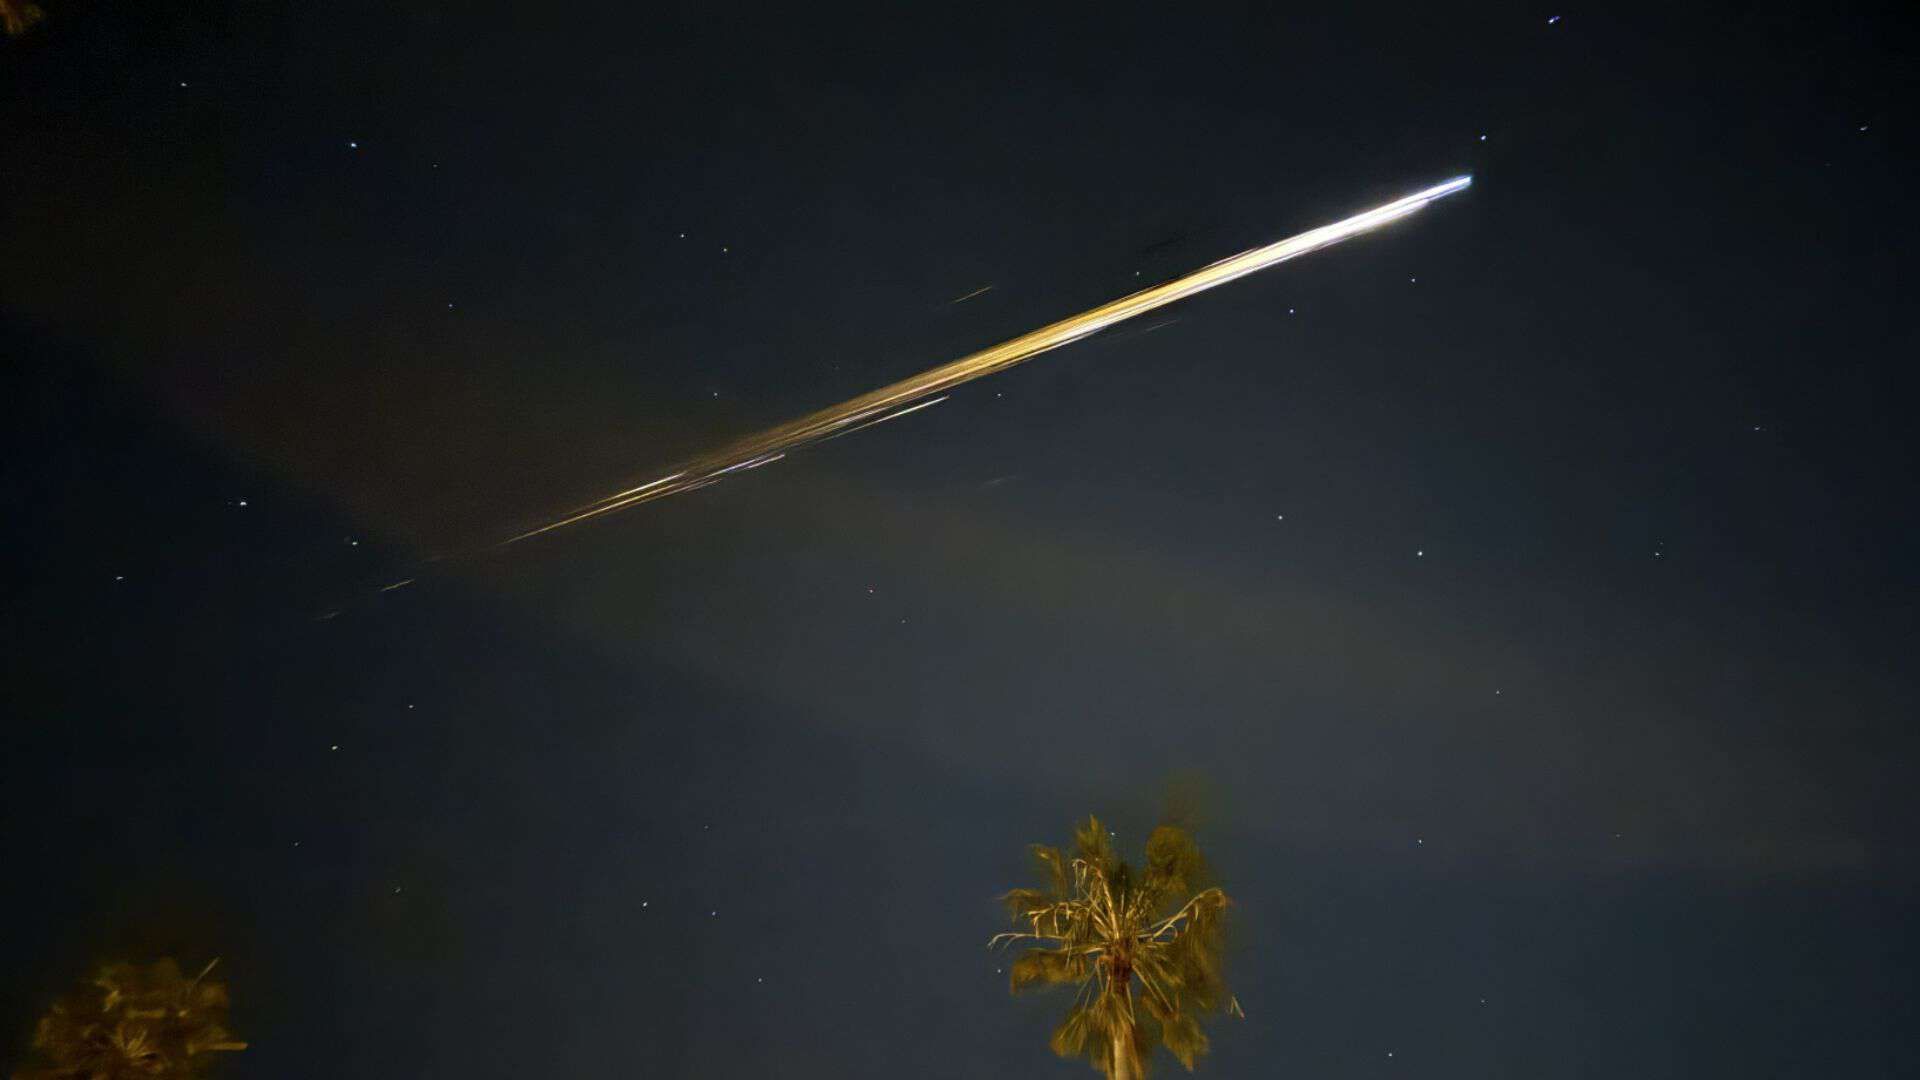 Christopher H. captured the fireball on April 2 from Ventura, US